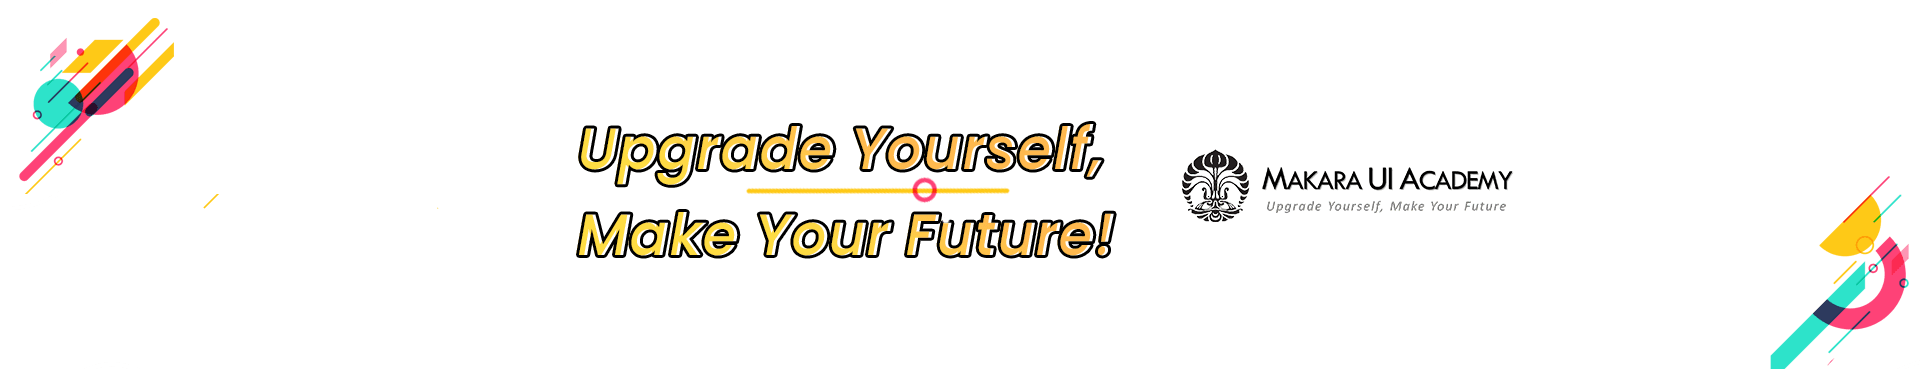 Upgrade your self, make your future